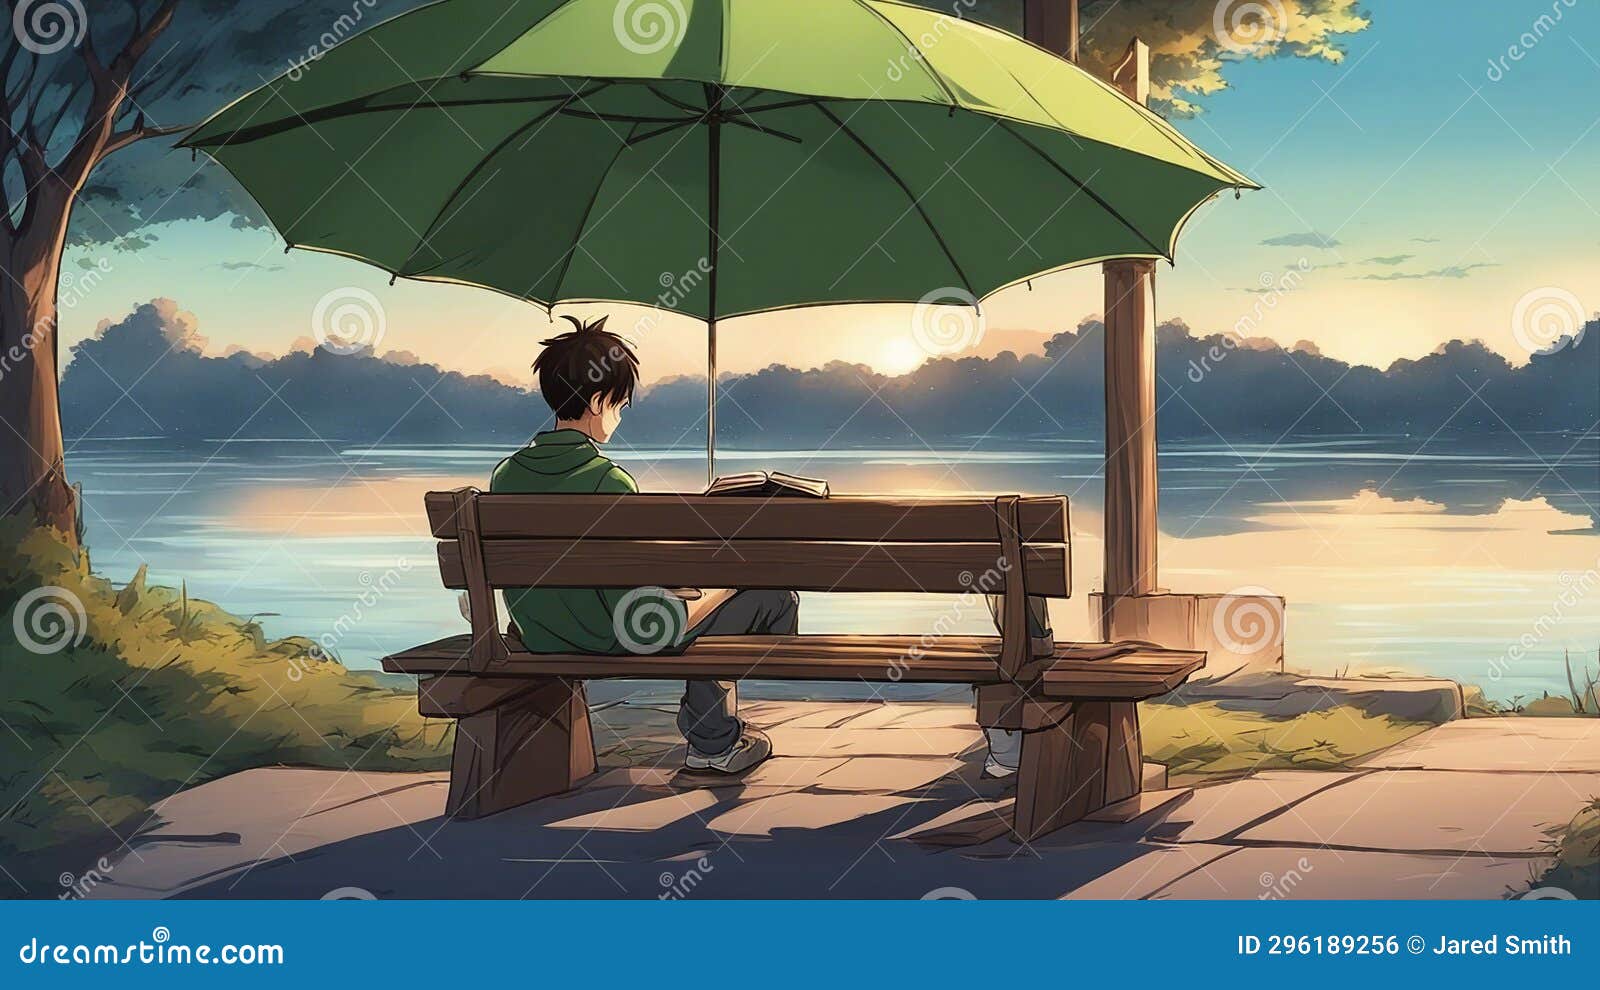 Download Girl Sitting On A Bench Fall Anime Wallpaper | Wallpapers.com